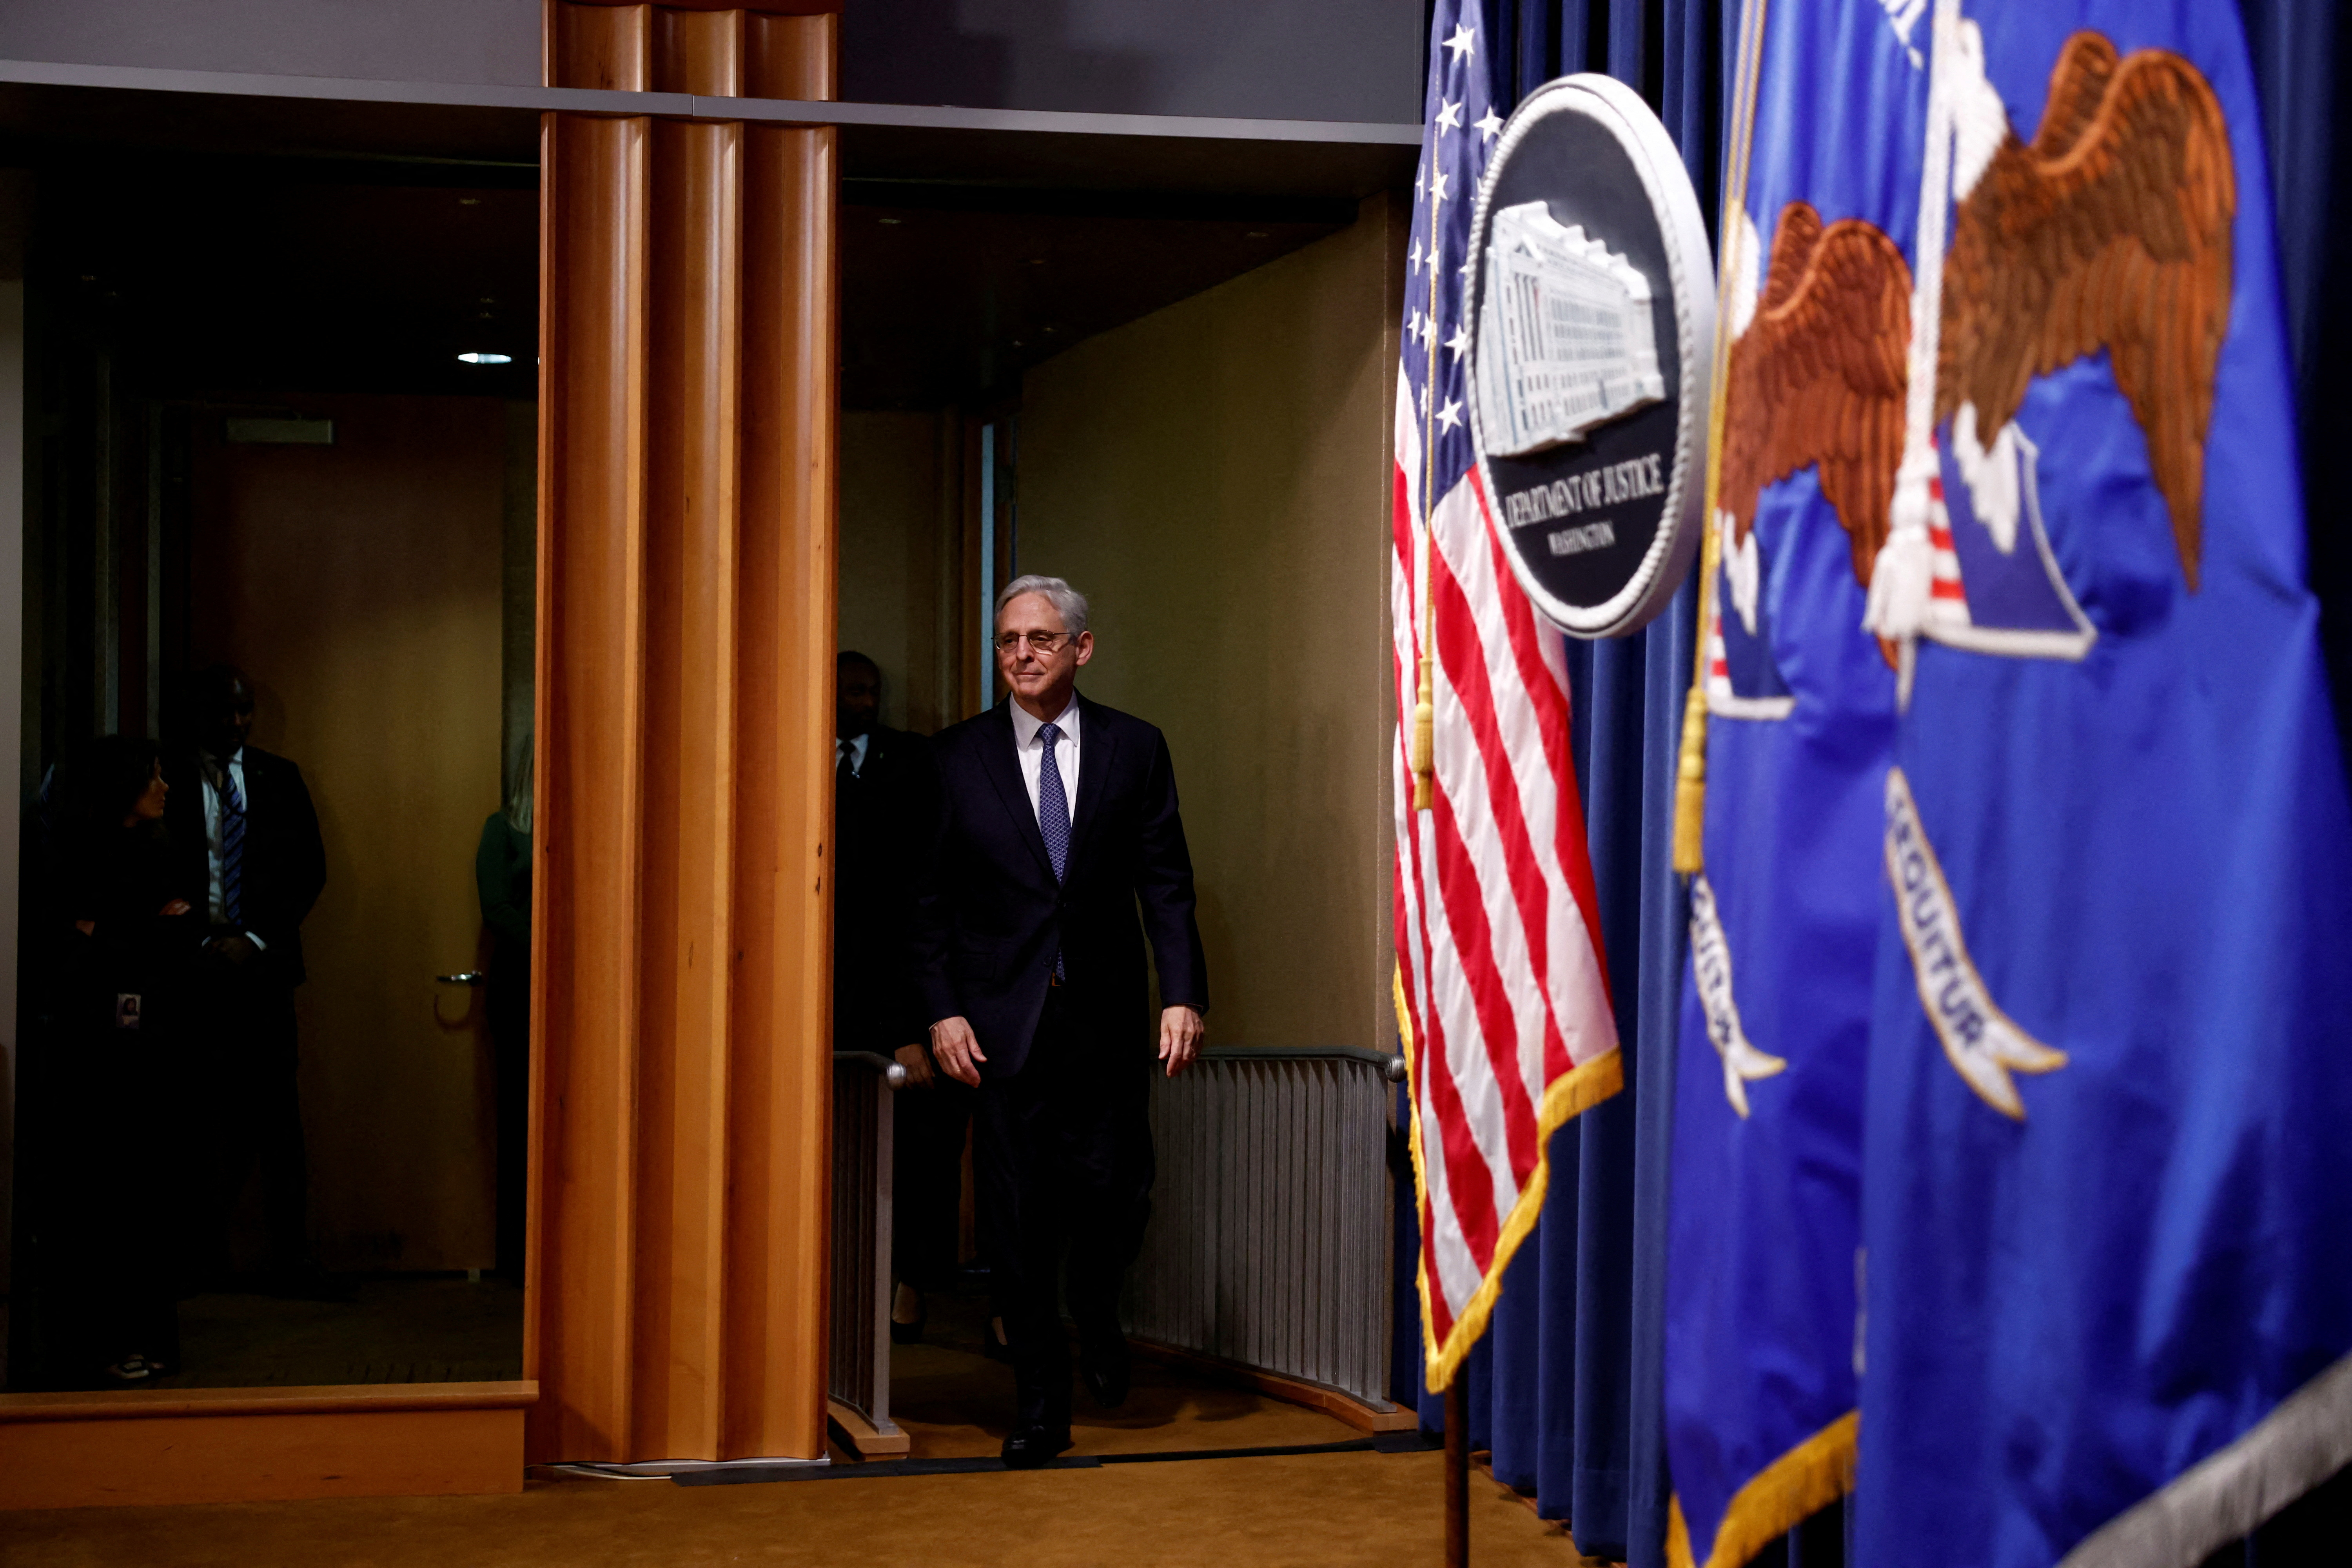 U.S. Attorney General Garland makes announcement about special counsel for Justice Department Trump investigations in Washington